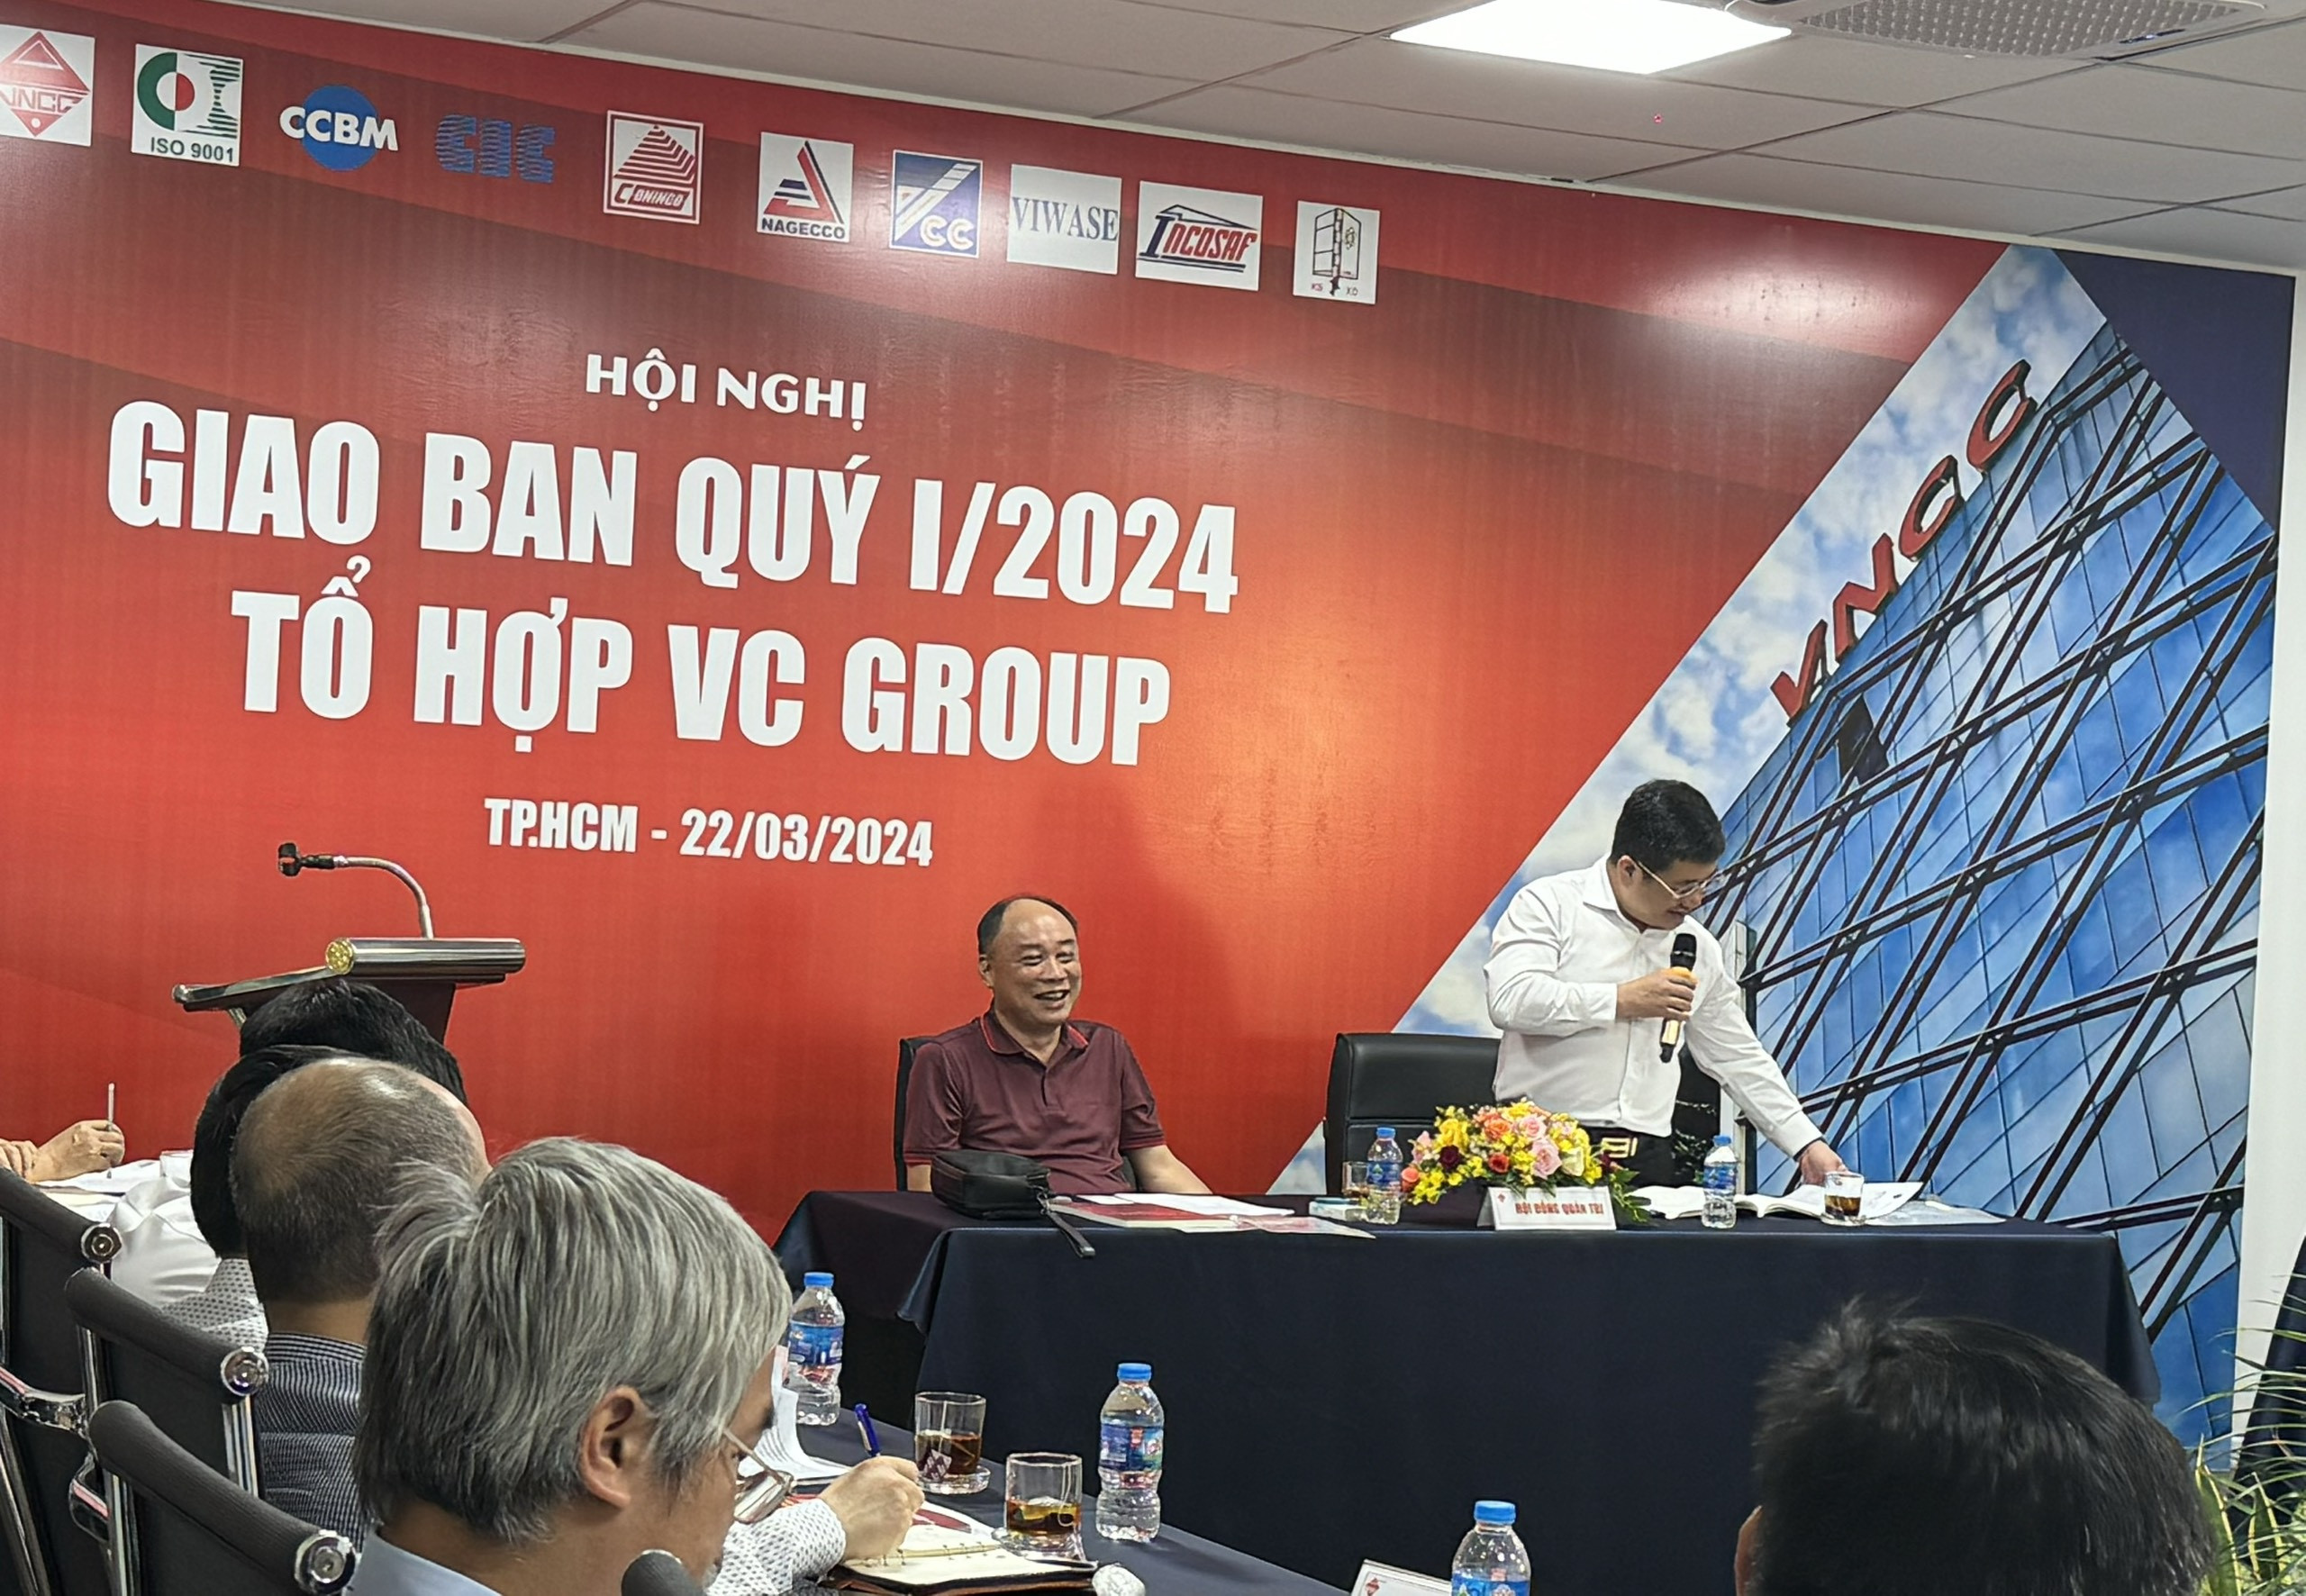 CONFERENCE FOR THE FIRST QUARTER 2024 OF VC GROUP HELD AT GENERAL CONSTRUCTION CONSULTING JOINT STOCK COMPANY ON MARCH 22, 2024